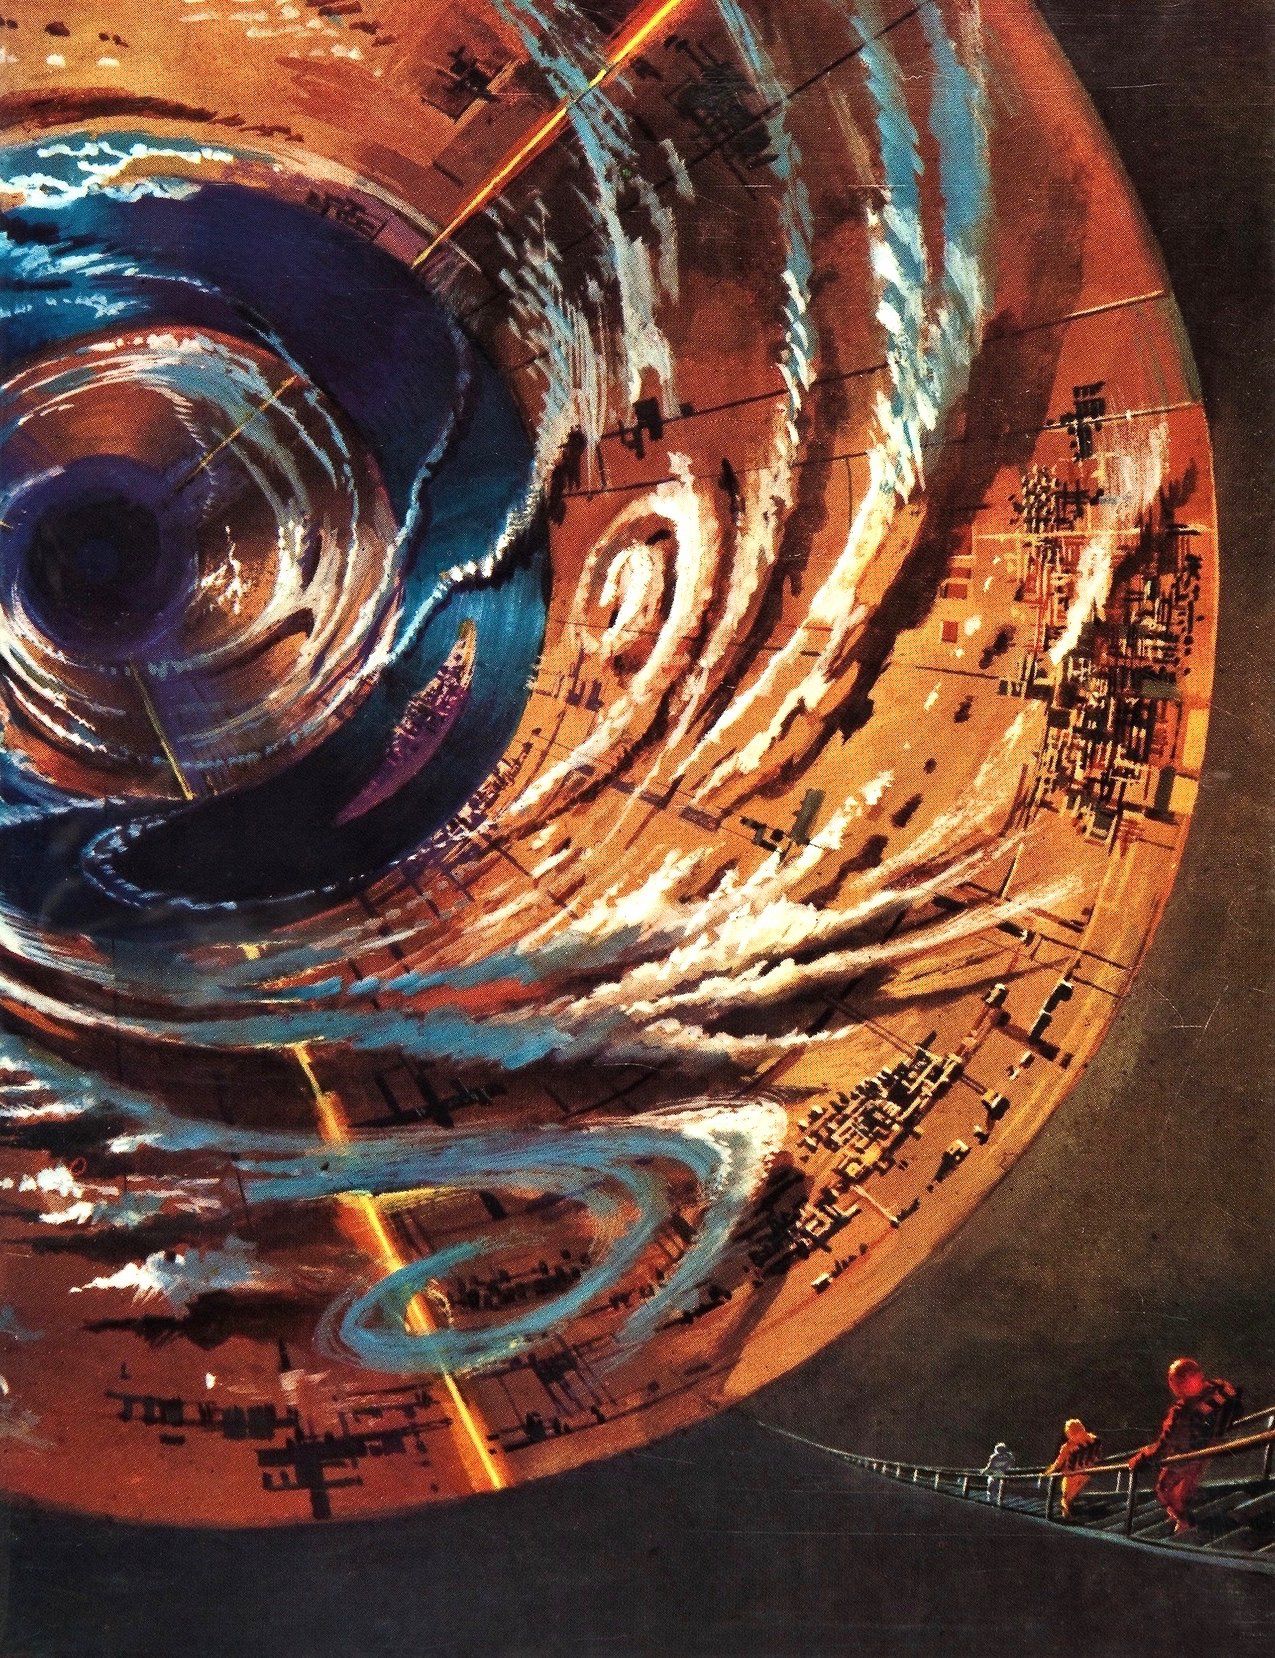 Rendezvous With Rama Review